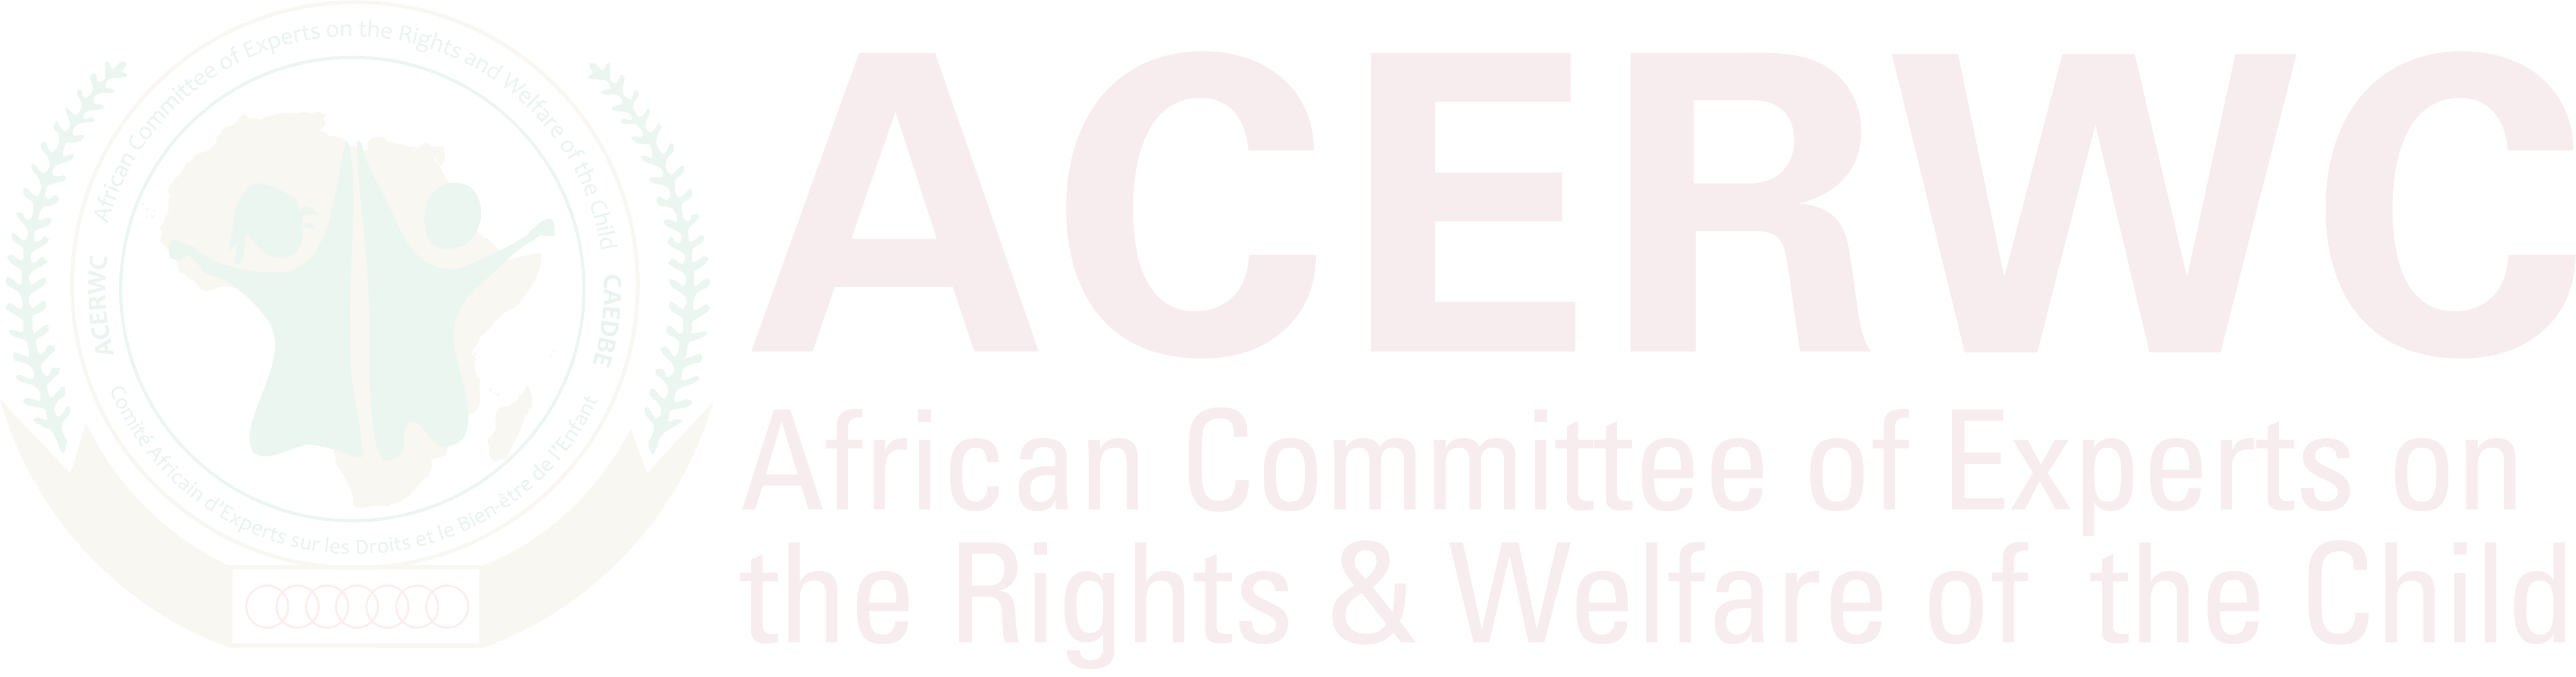 ACERWC - African Committee of Experts on the Rights and Welfare of the Child